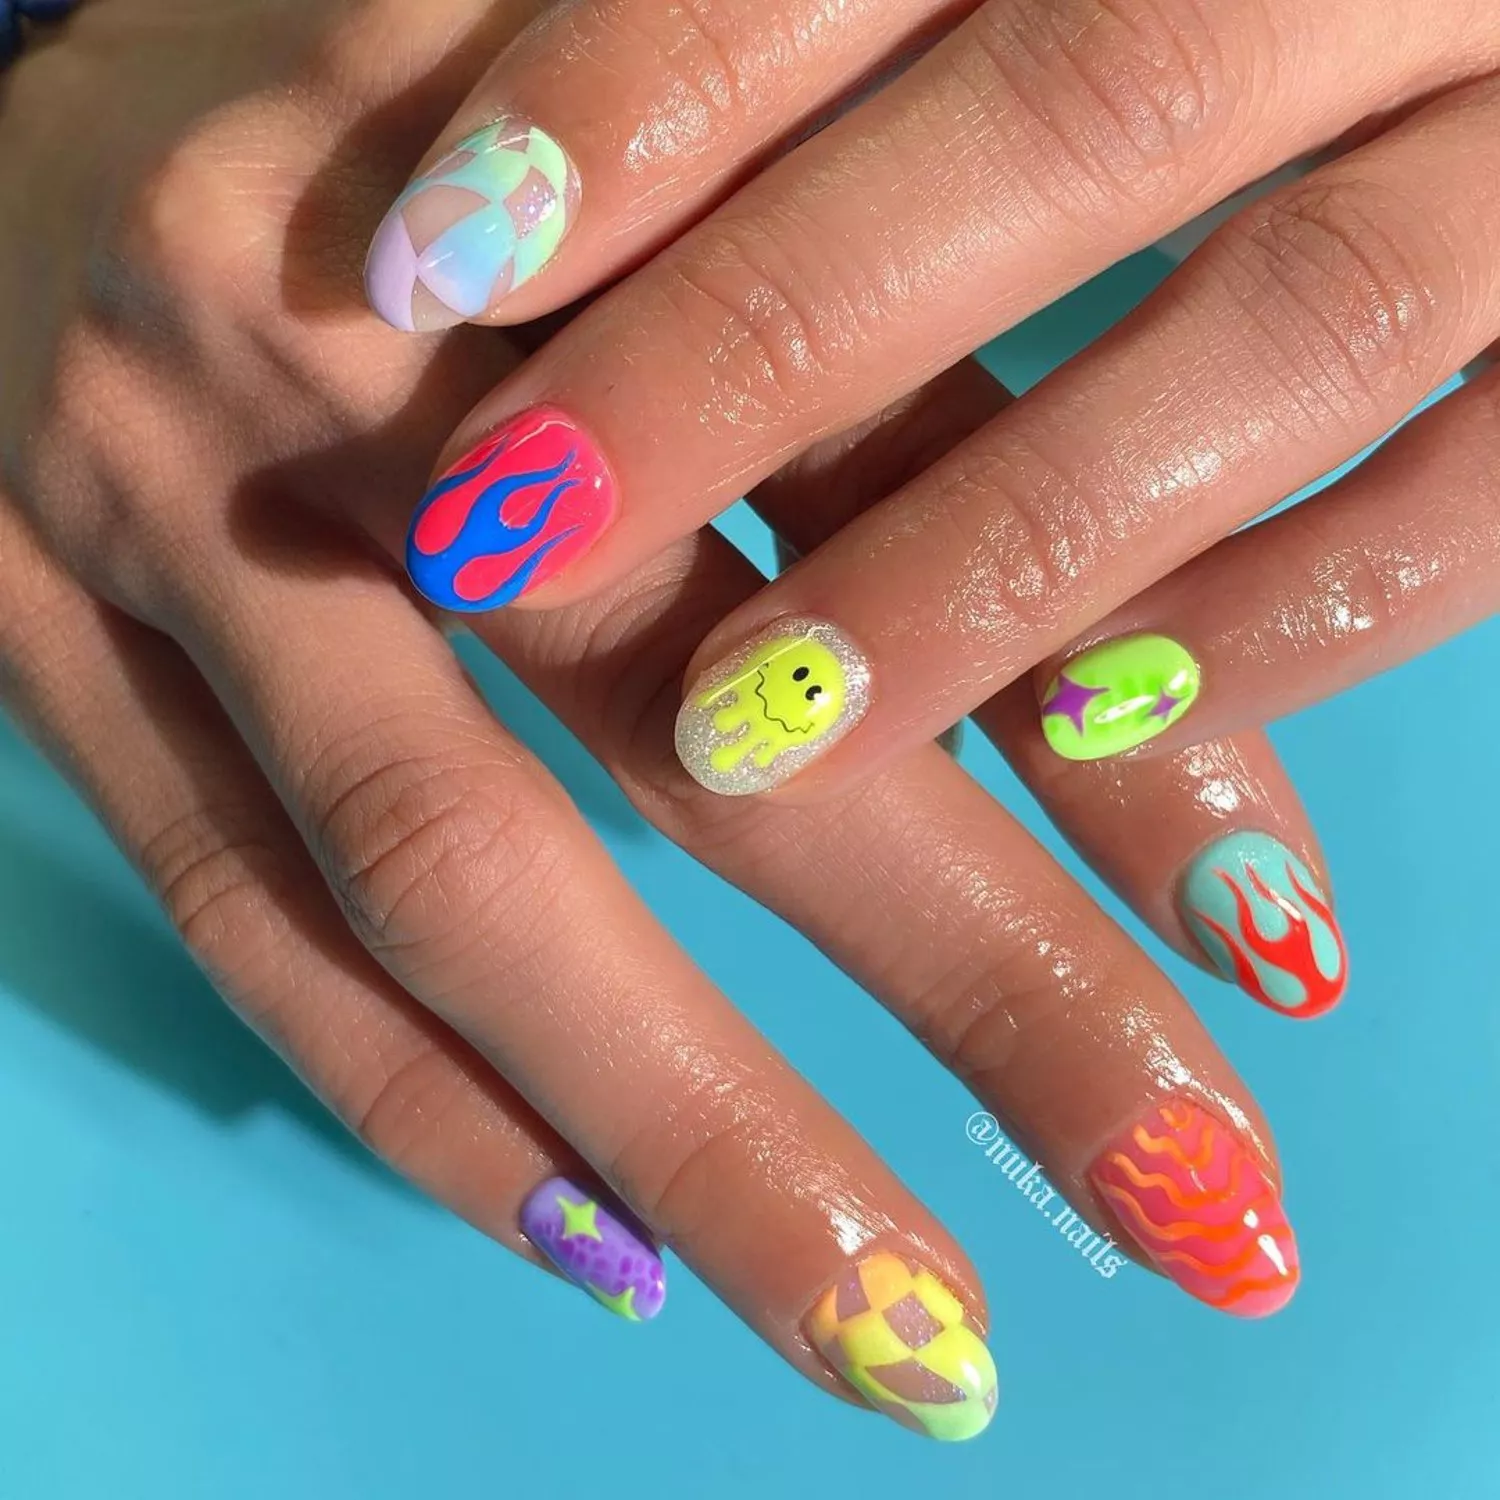 Manicure with abstract checkerboard, multicolored flame, melting smiley, and sparkle designs